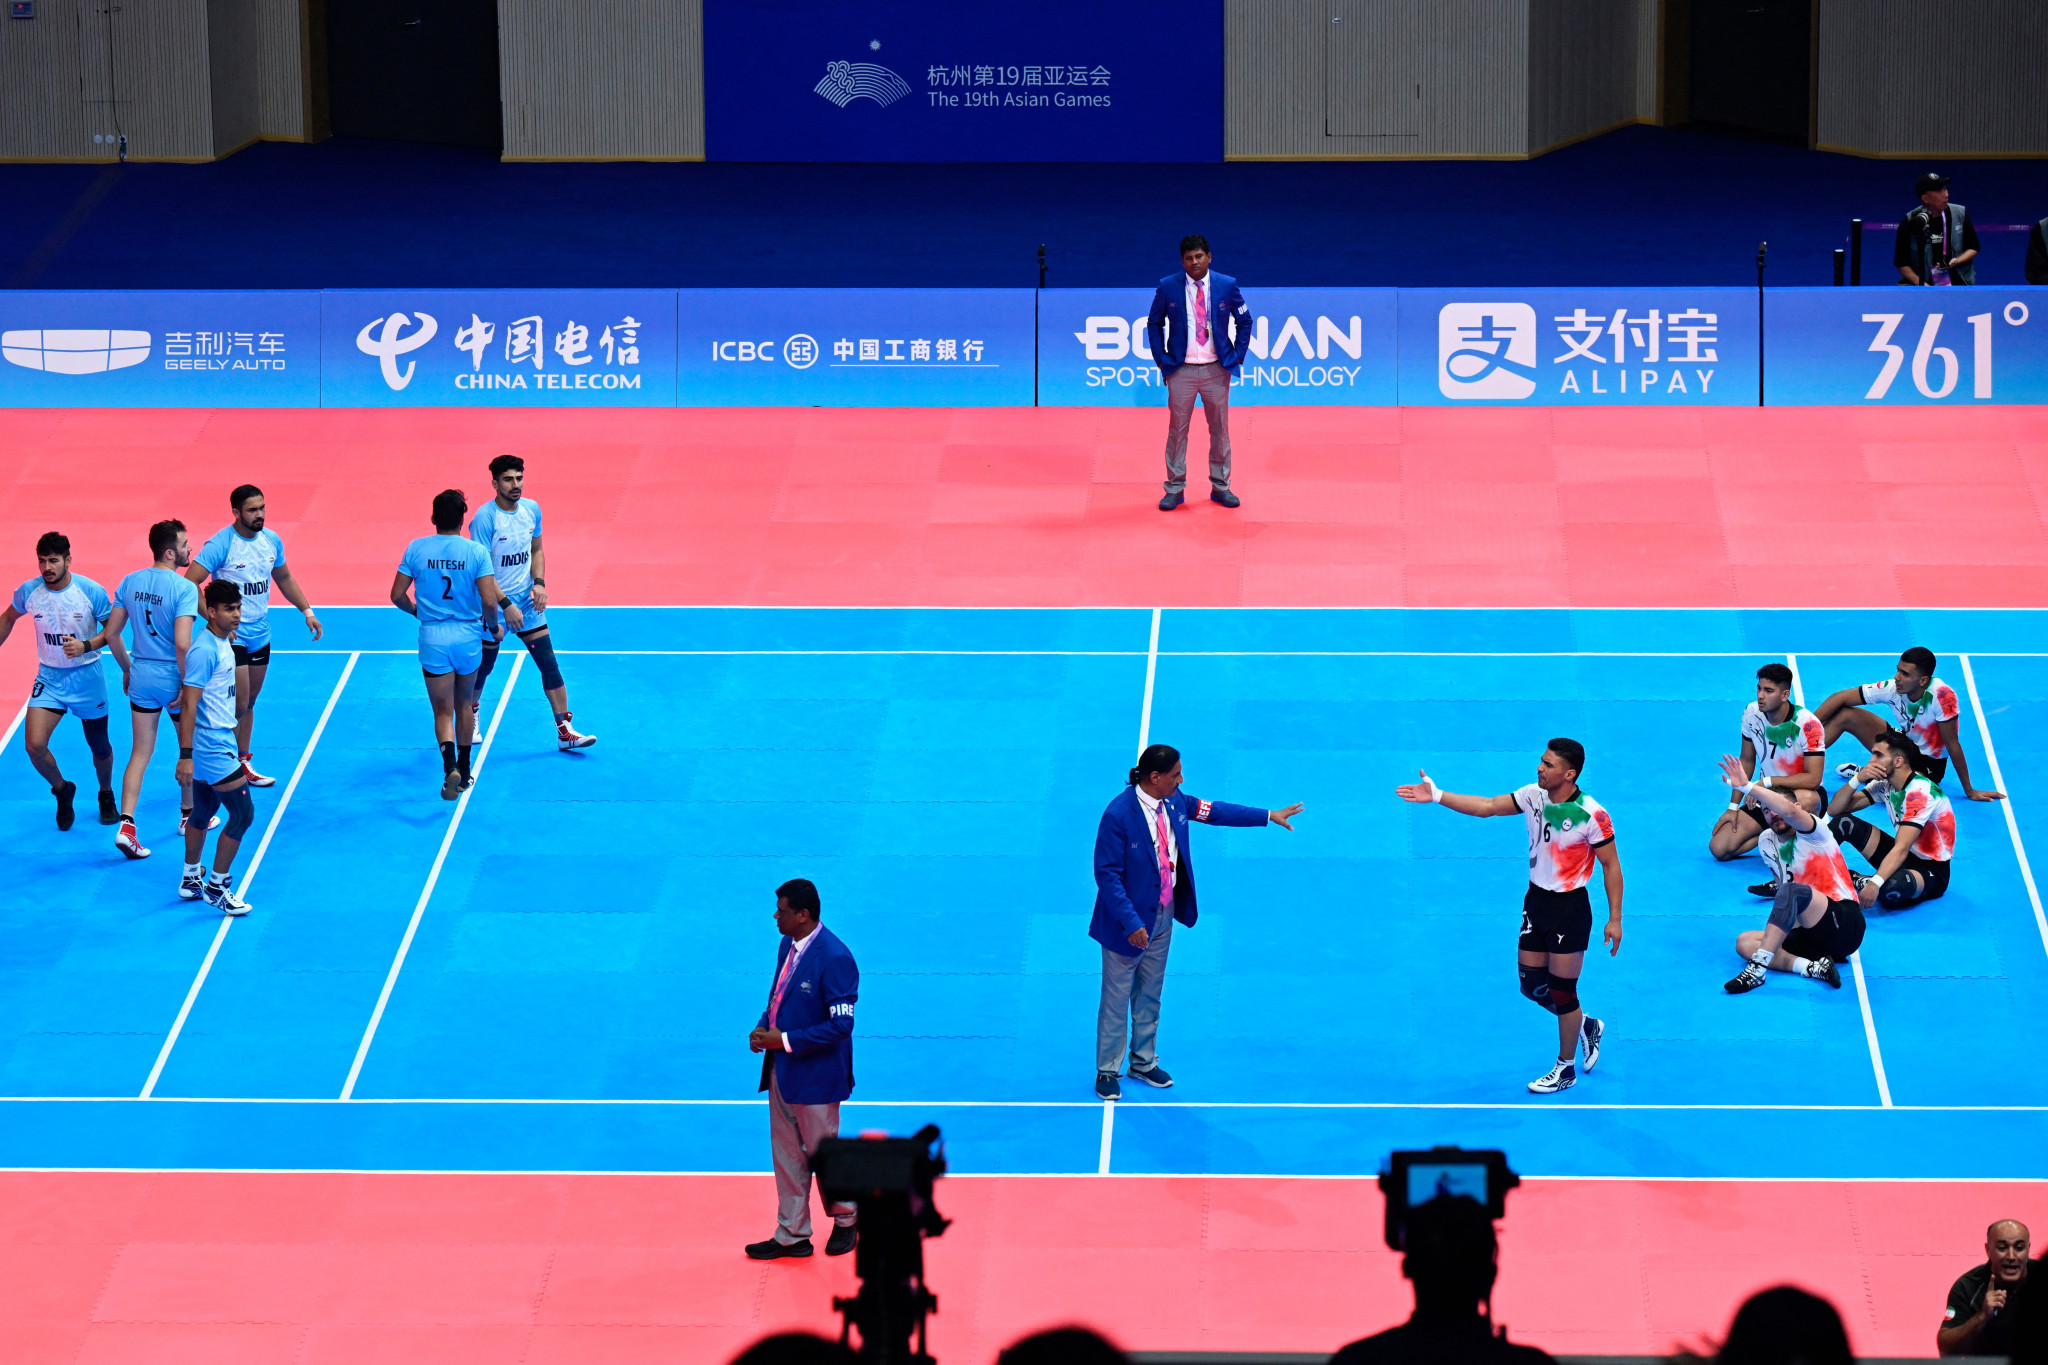 Kabaddi final descends into chaos with on-court protests at Hangzhou 2022